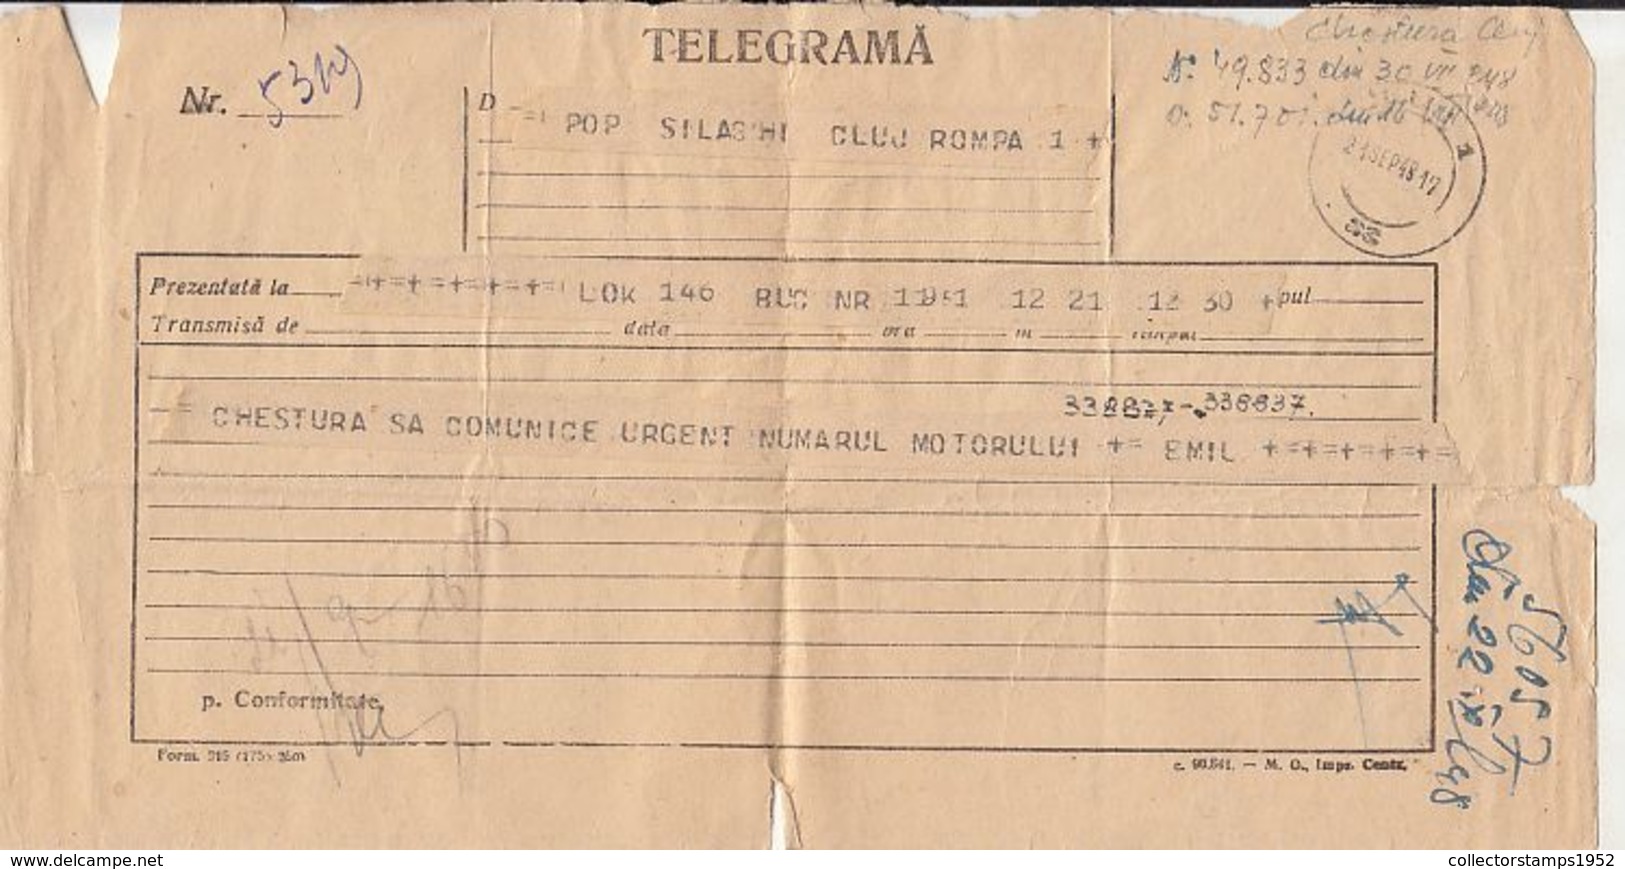 89631- TELEGRAMME SENT FROM BUCHAREST TO CLUJ NAPOCA, 1948, ROMANIA - Télégraphes